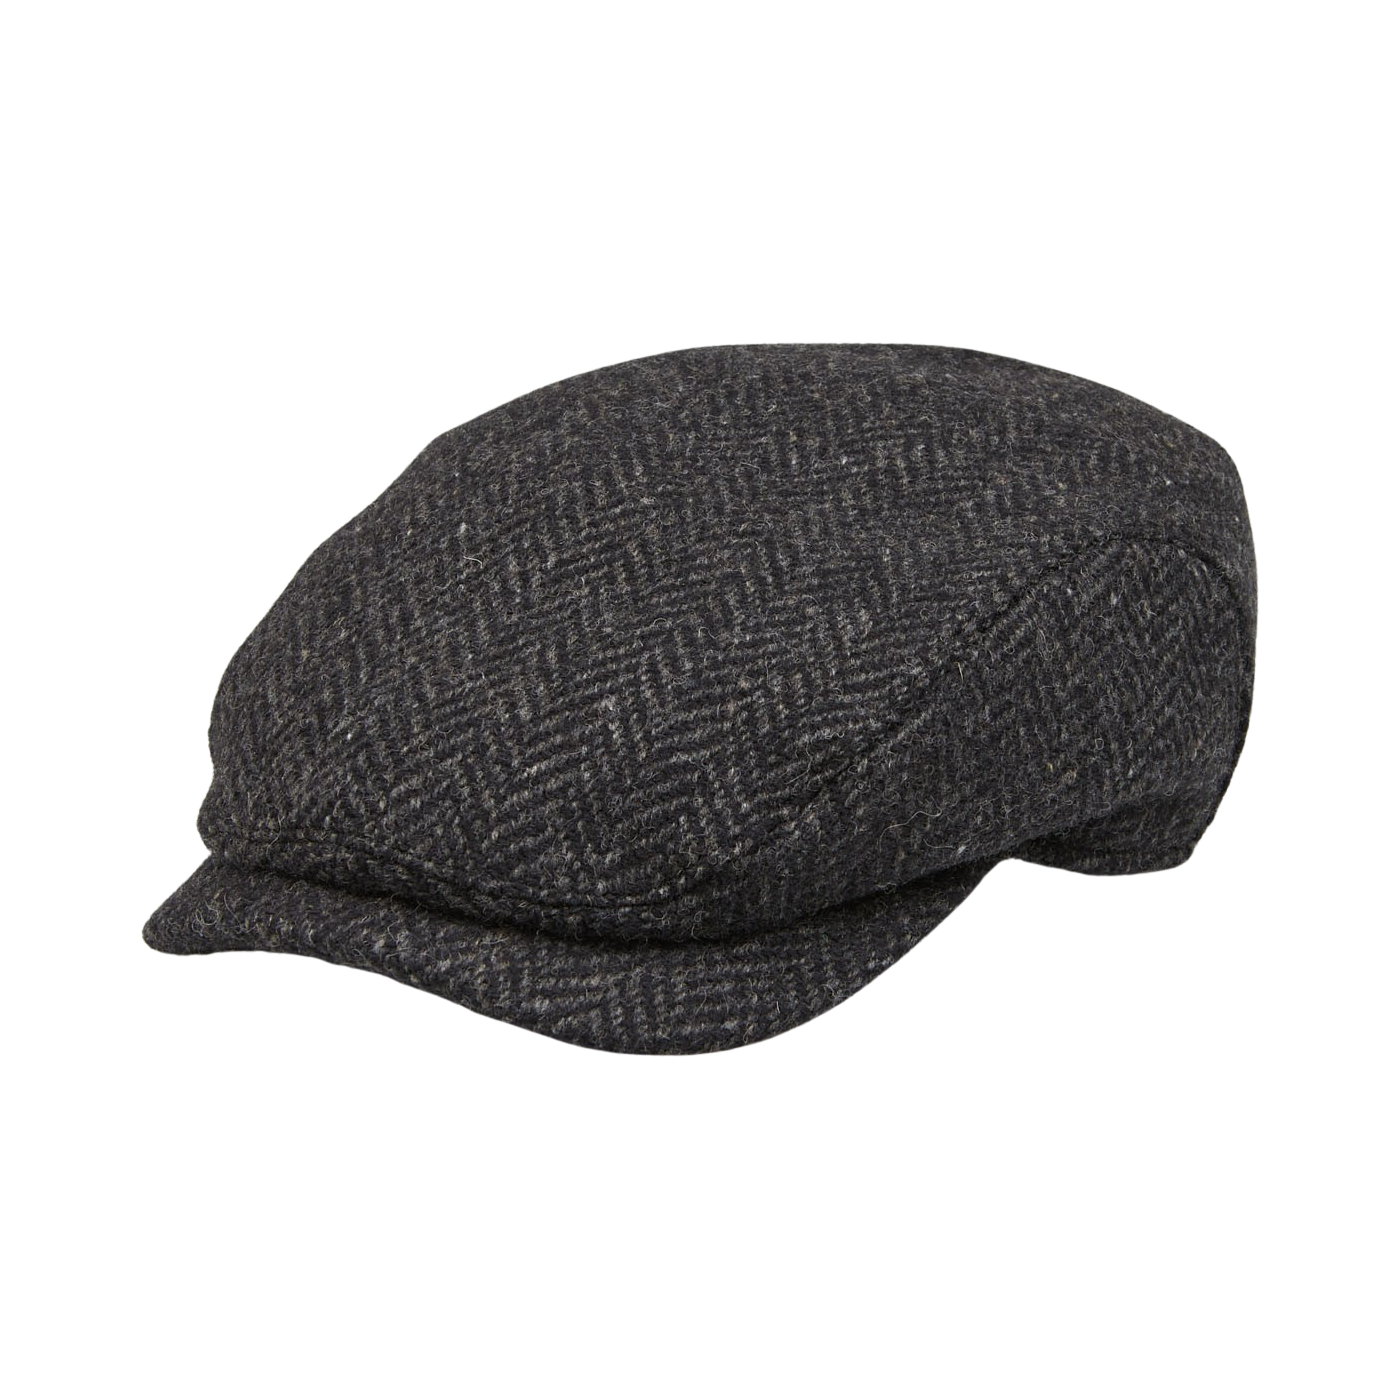 The Grey Herringbone Wool Ivy Contemporary Cap made of virgin wool is shown on a white background by Wigéns.